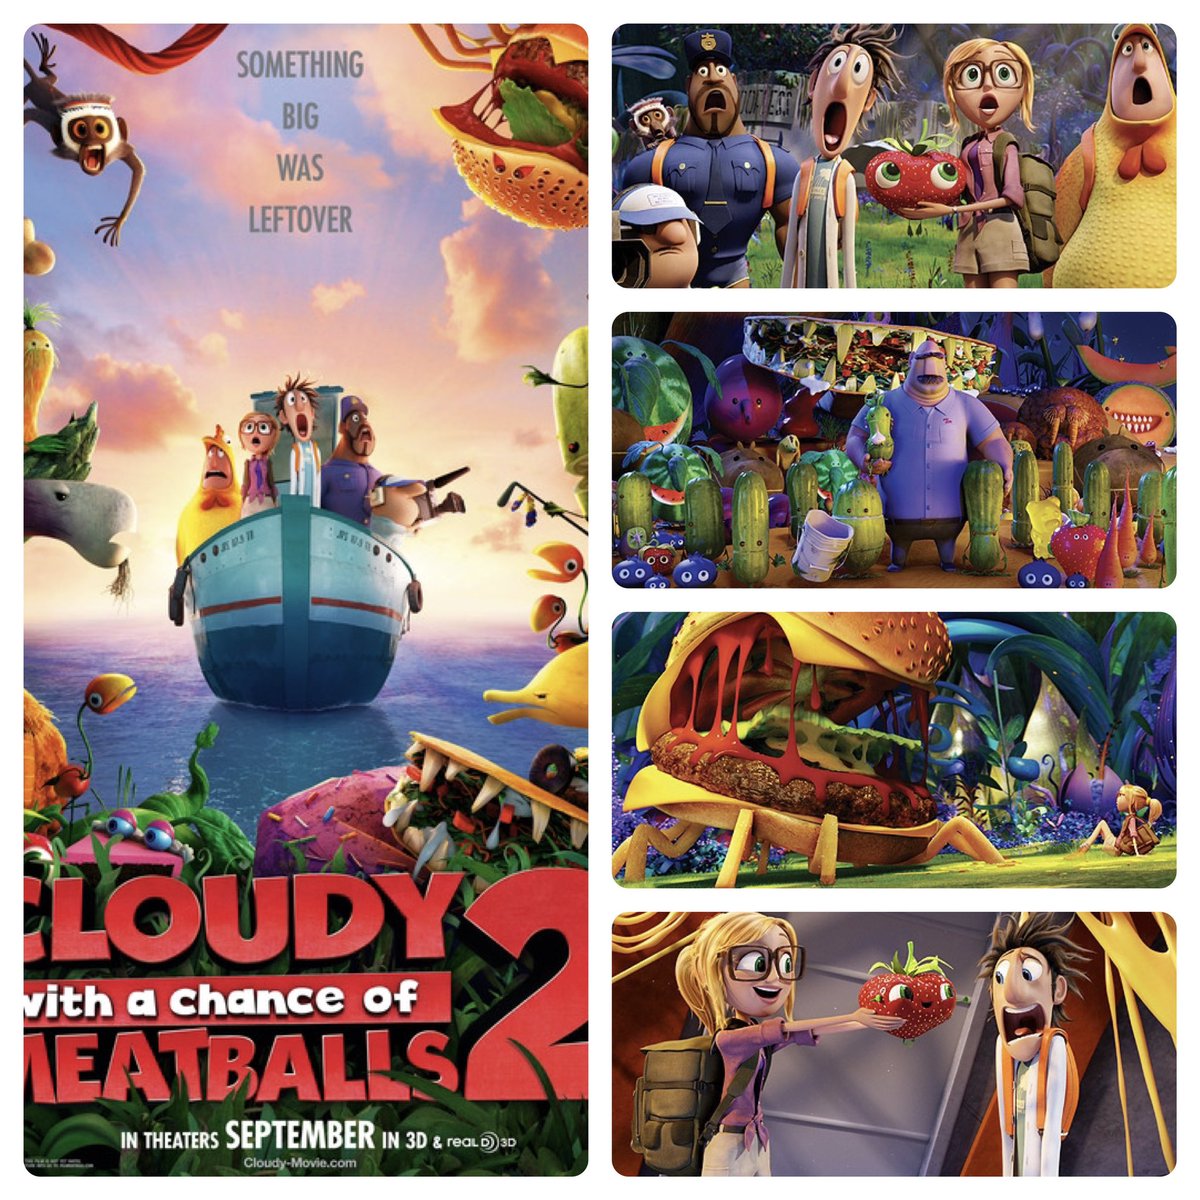 Cloudy with a Chance of Meatballs 2 celebrates 10th anniversary today.
#cloudywithachanceofmeatballs2 #flintlockwood #samsparks #stevethemonkey #classicmovie #classicfilms #sonypictures #sonypicturesstudios #sonypicturesreleasing #columbiapictures #sonypicturesanimation